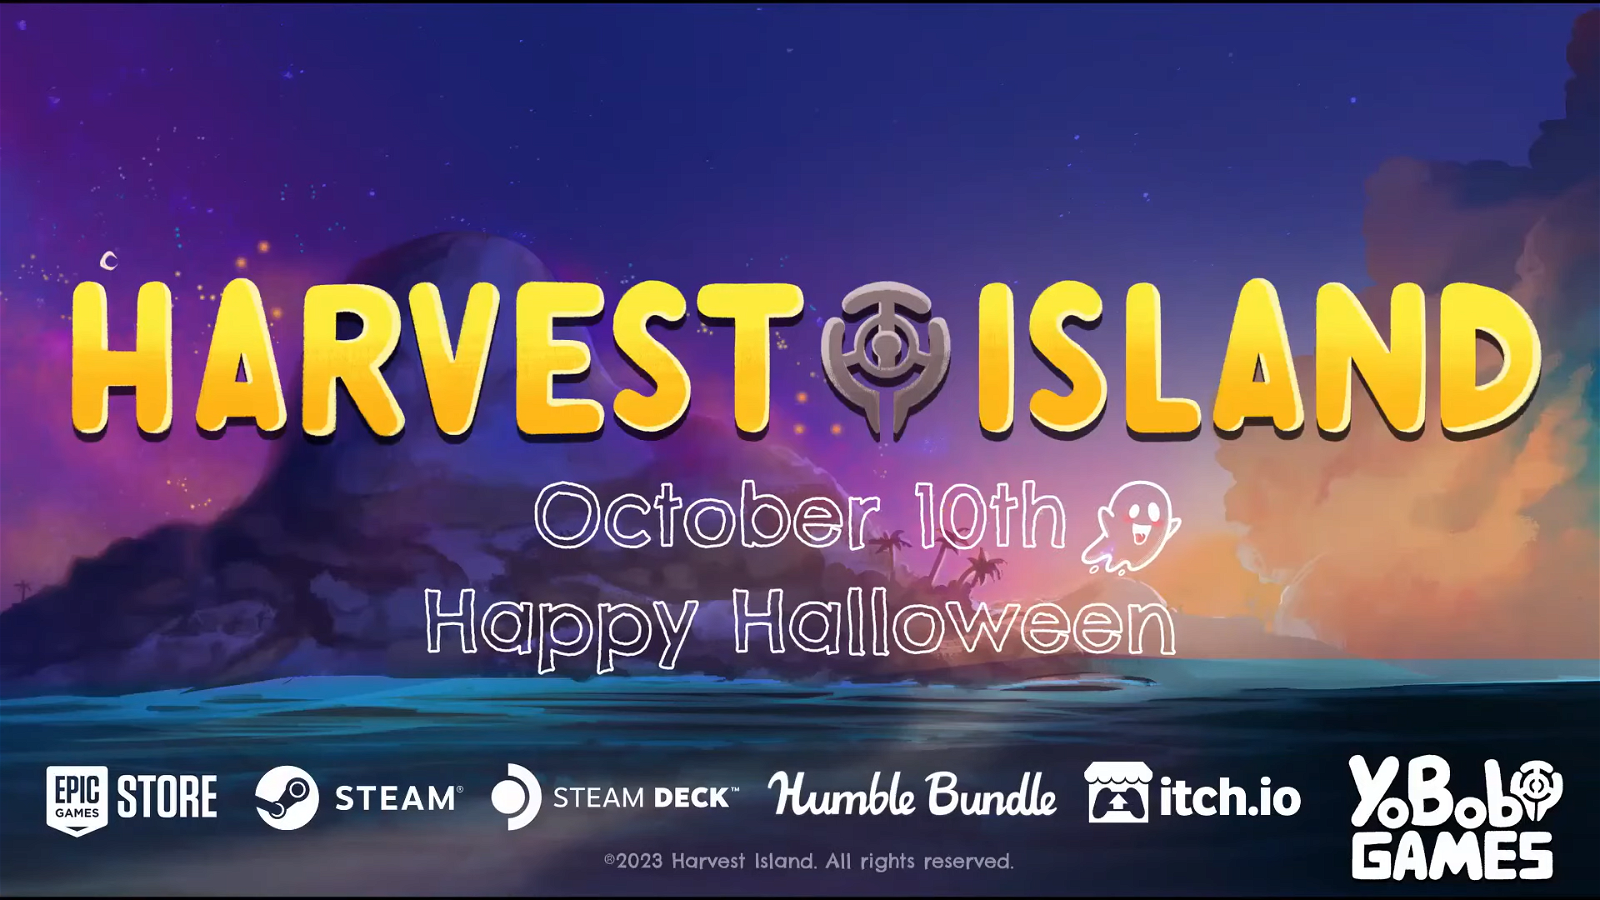 Harvest Island is coming out on the 10th of October, just in time for Halloween.